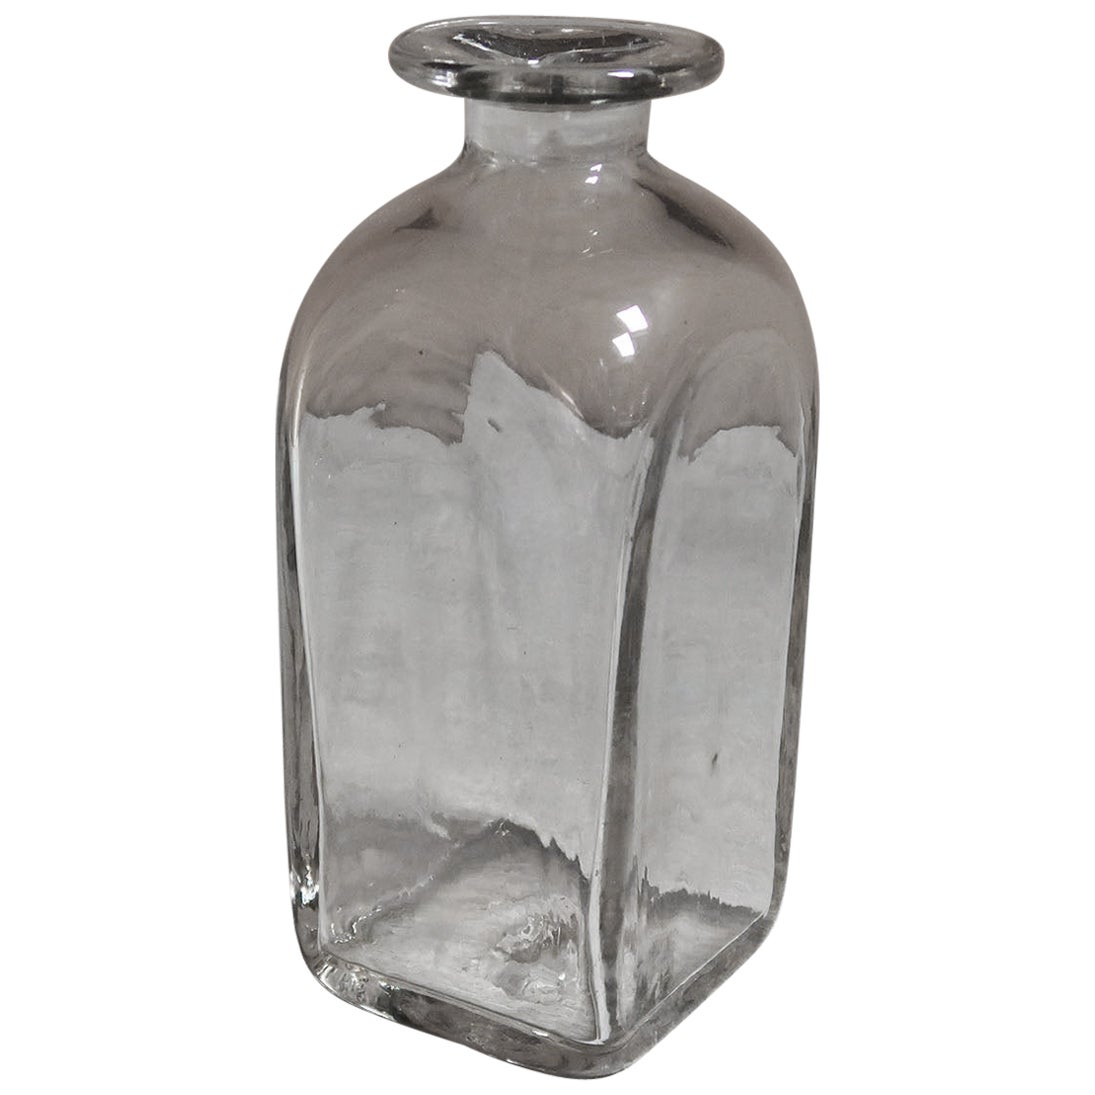 Antique Square Shaped Glass Carafe, English, 19th Century